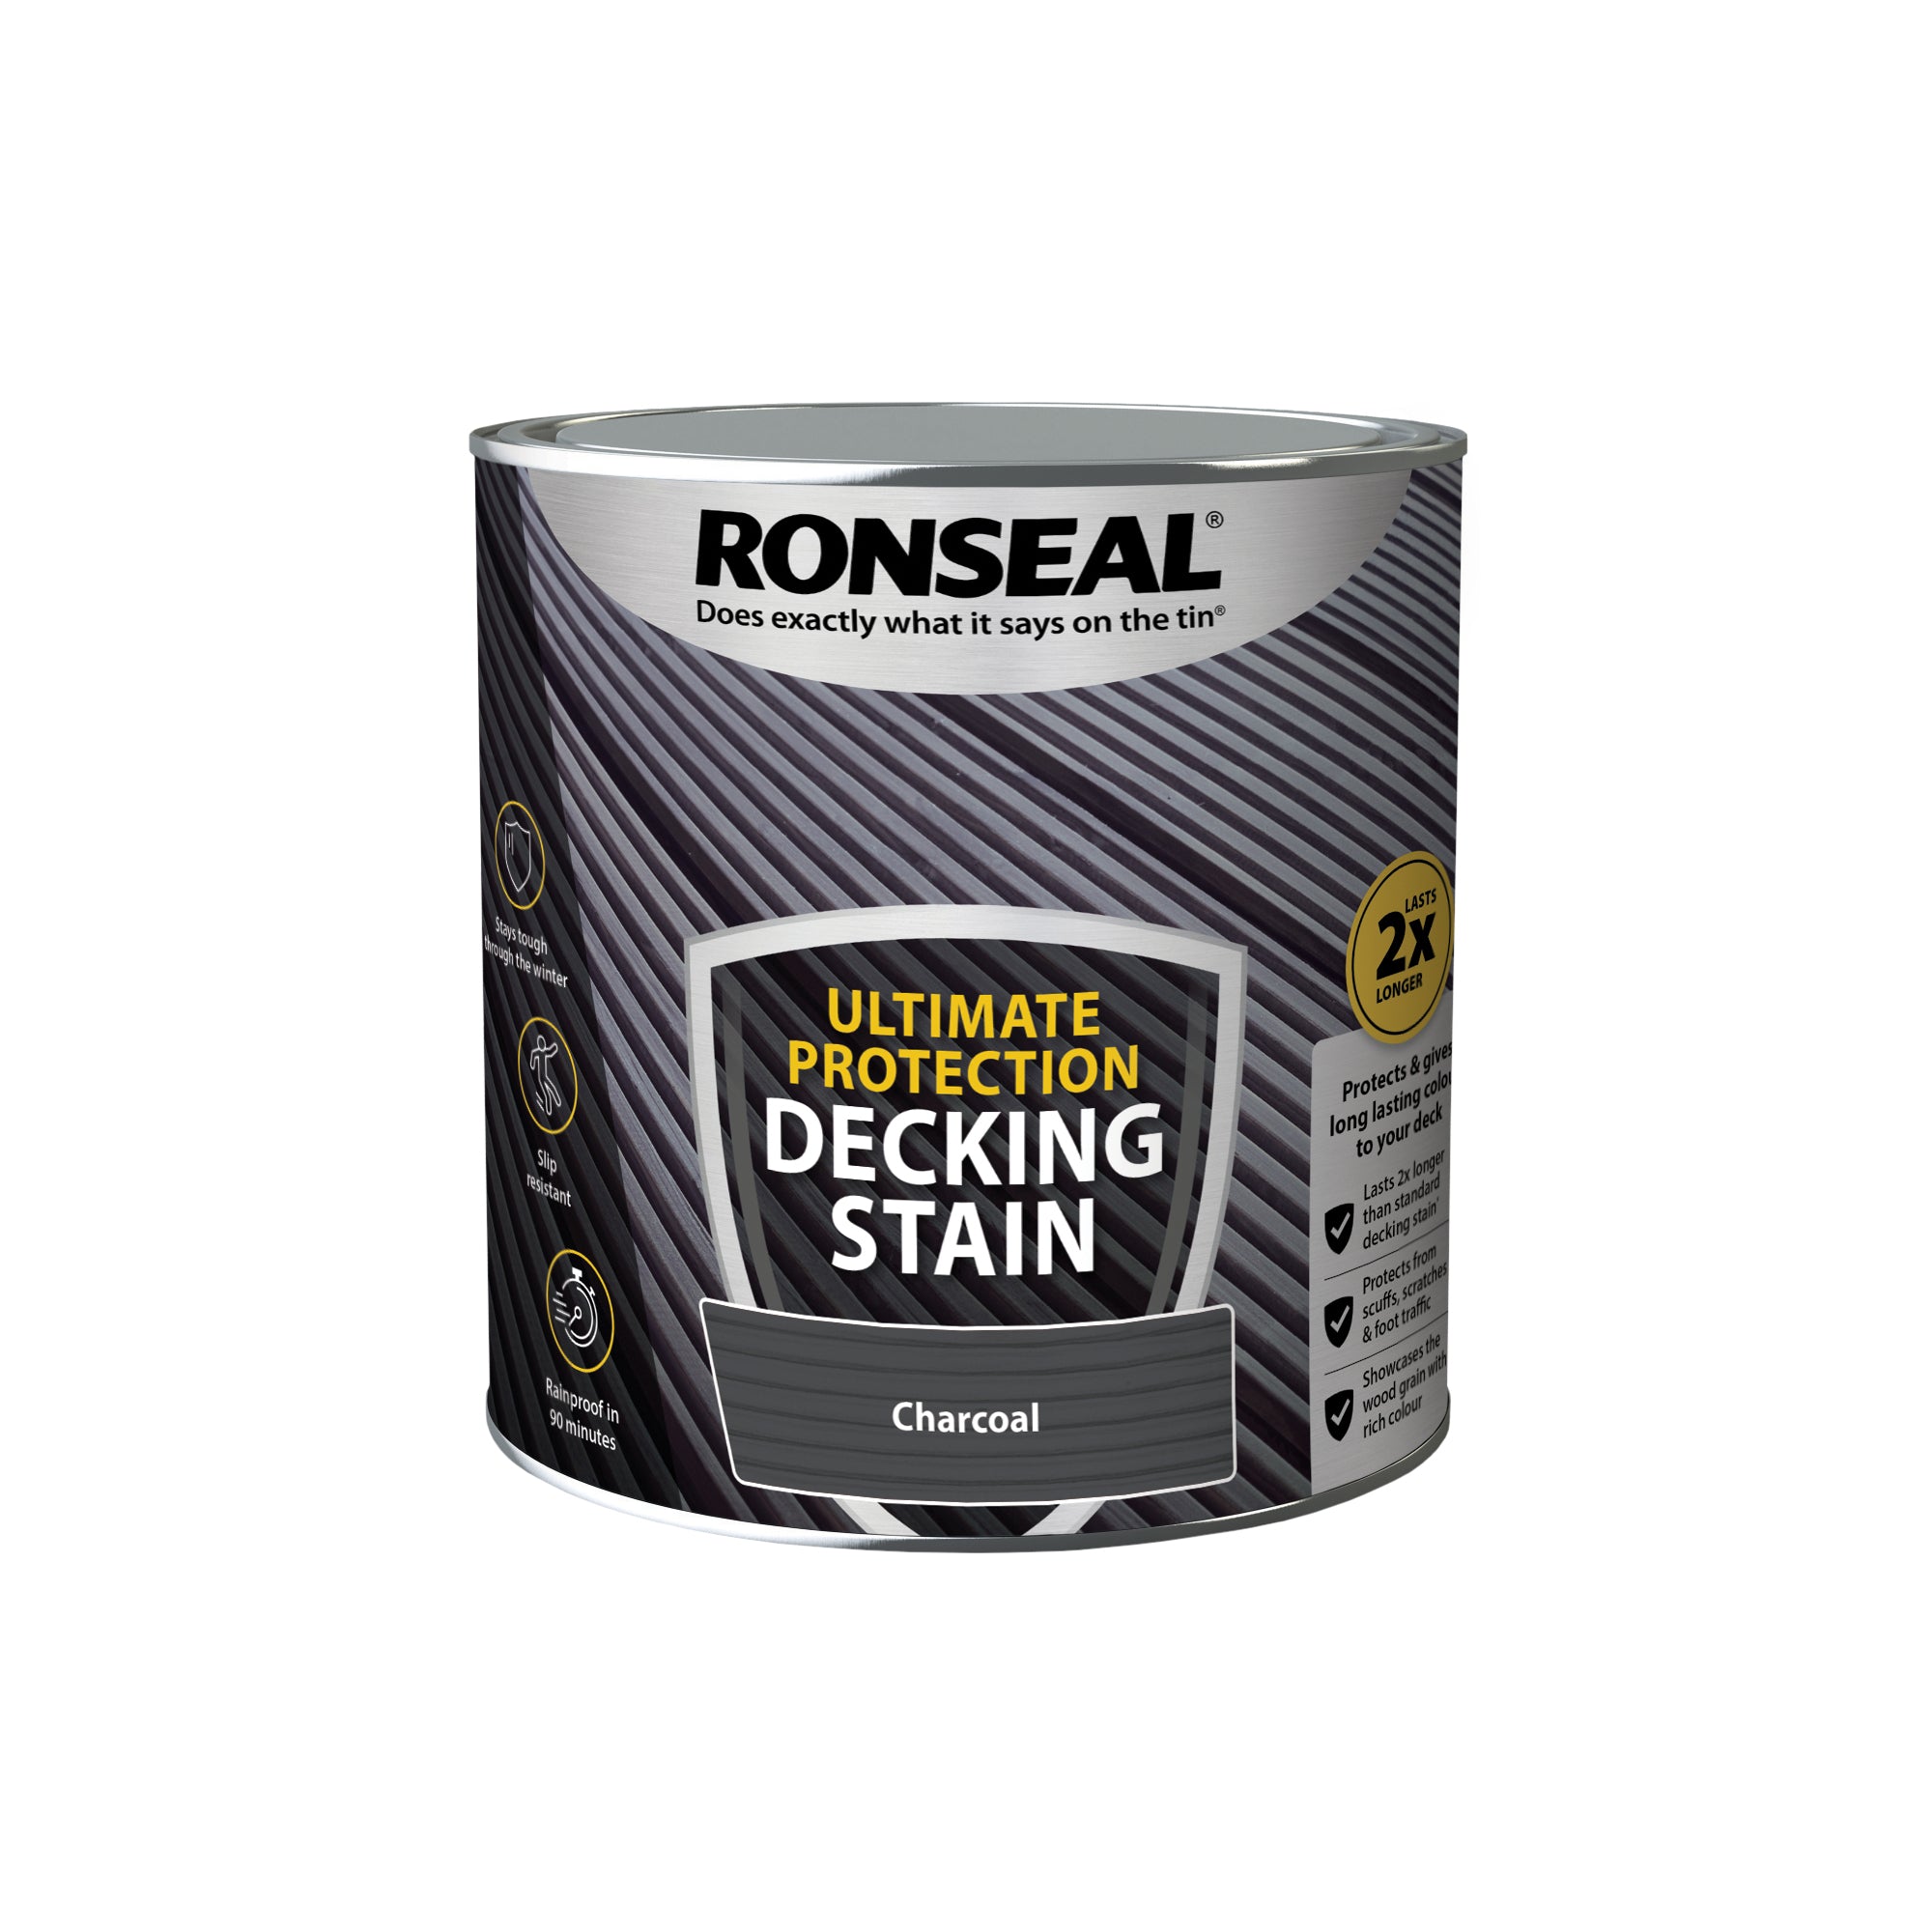 Ronseal-Ultimate-Protection-Decking-Stain-Charcoal-2.5L